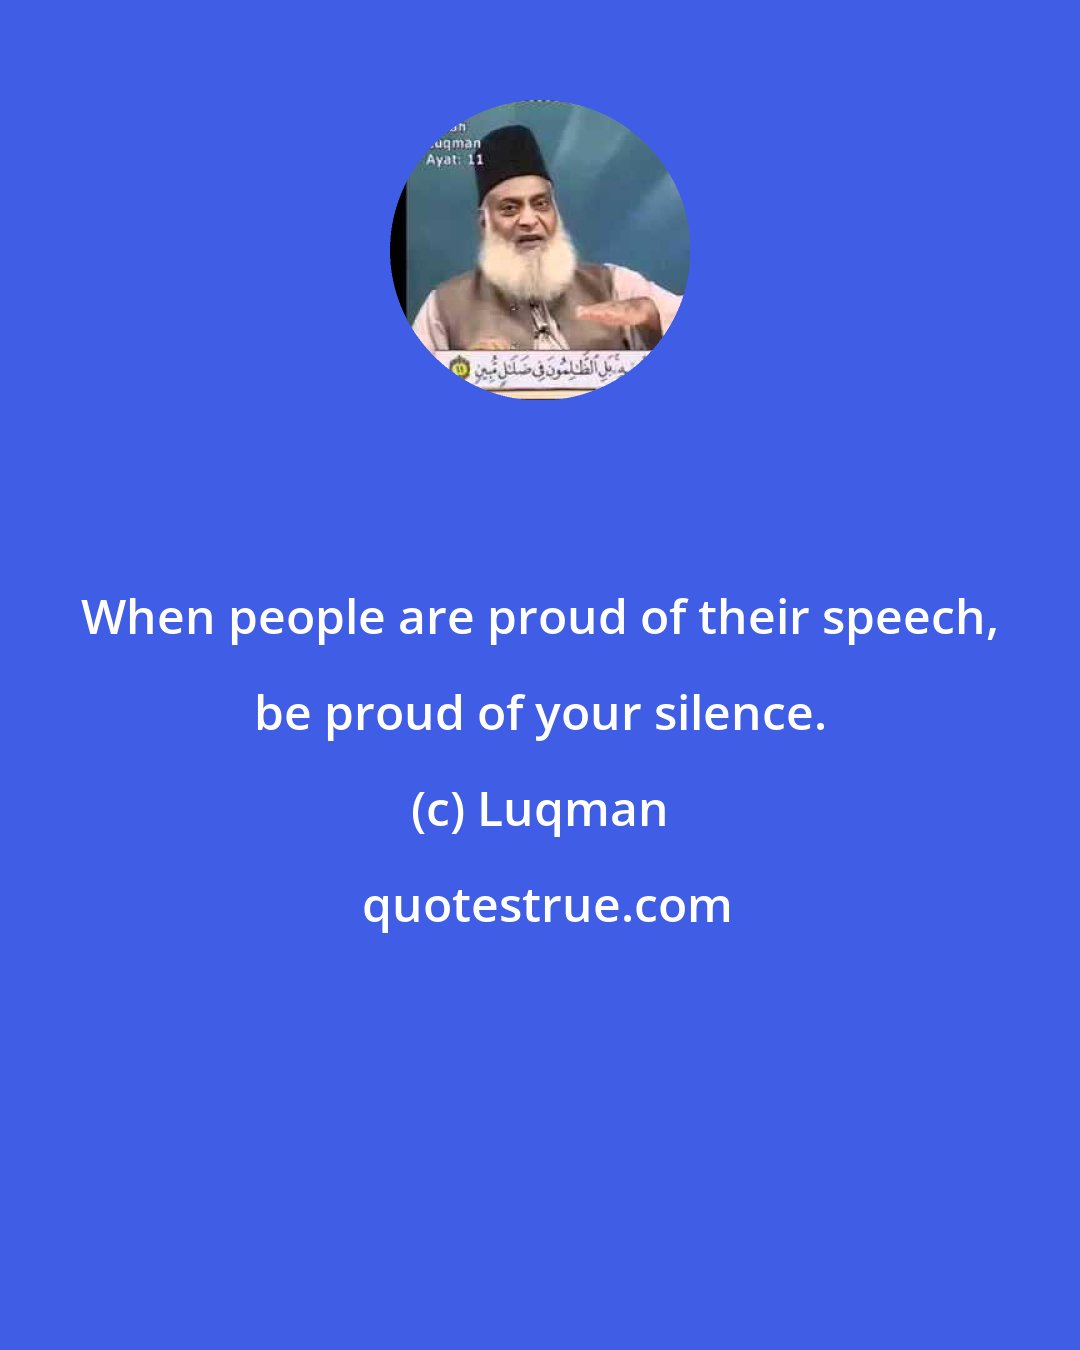 Luqman: When people are proud of their speech, be proud of your silence.